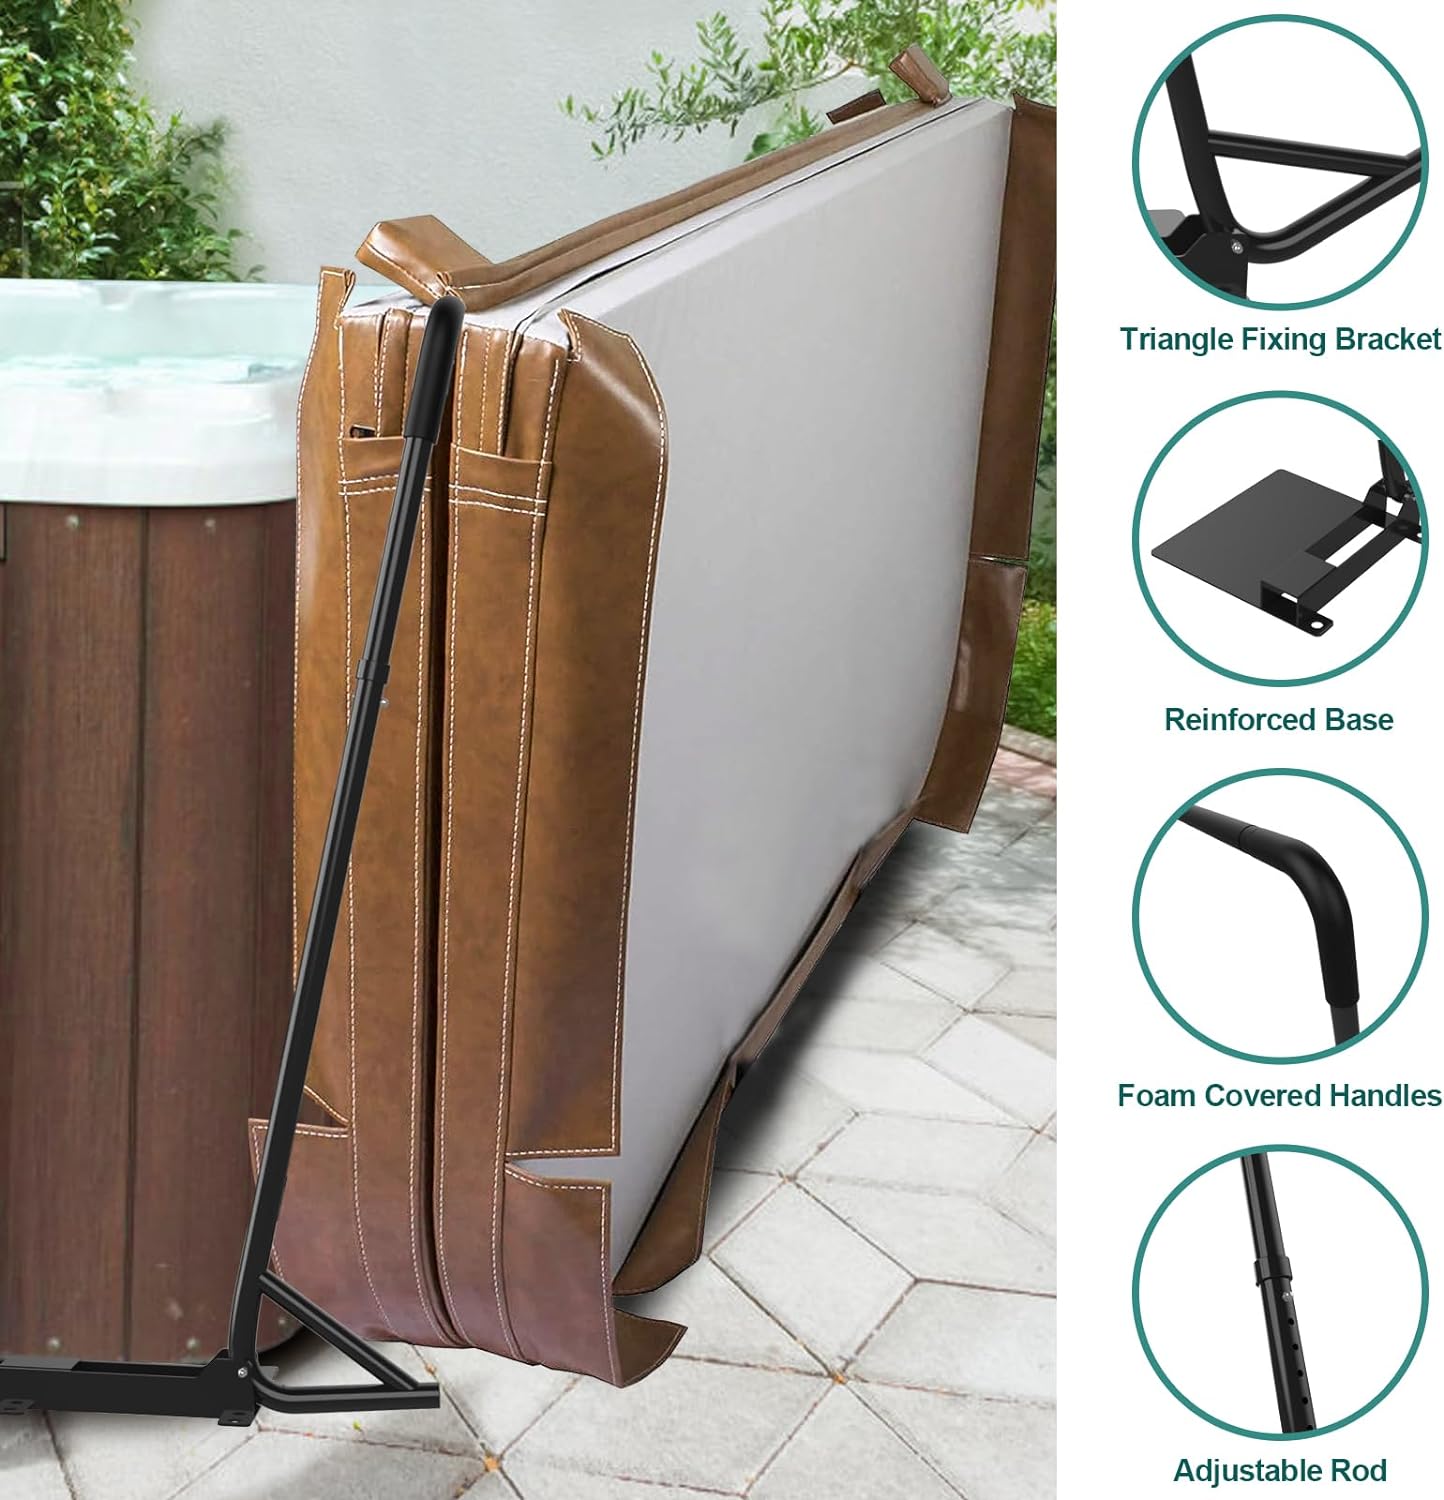 Spa Cover Lift, Under Mount Hot Tub Cover Lift Removal System Reinforced Bracket with 2 Top Mount Foam Cover, fits Most Hot Tub Sizes Spa Cover Lift